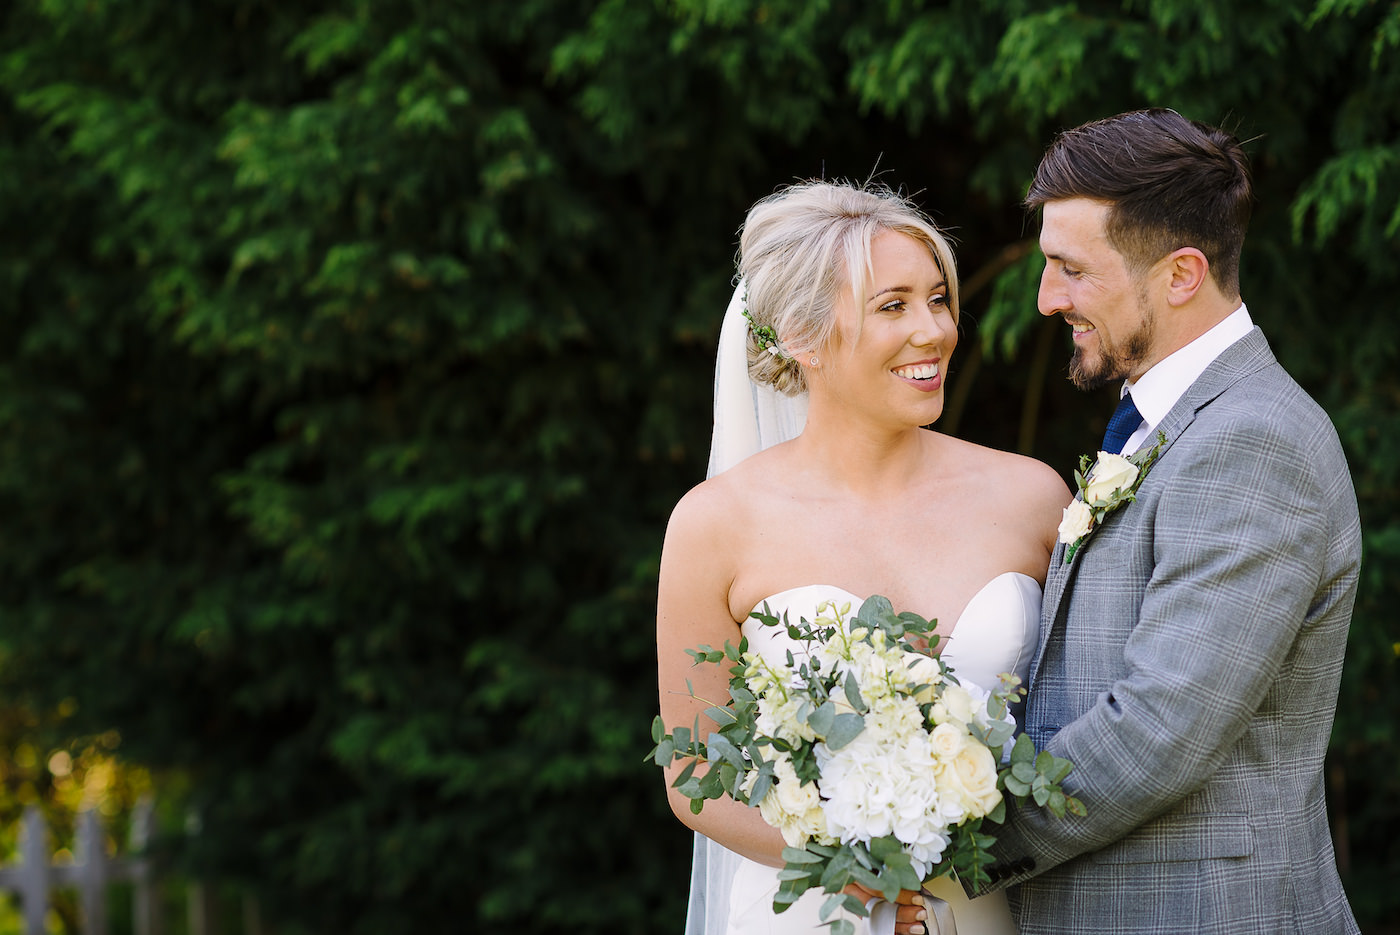 Bride and groom portrait photo in the garden at Russets Country House